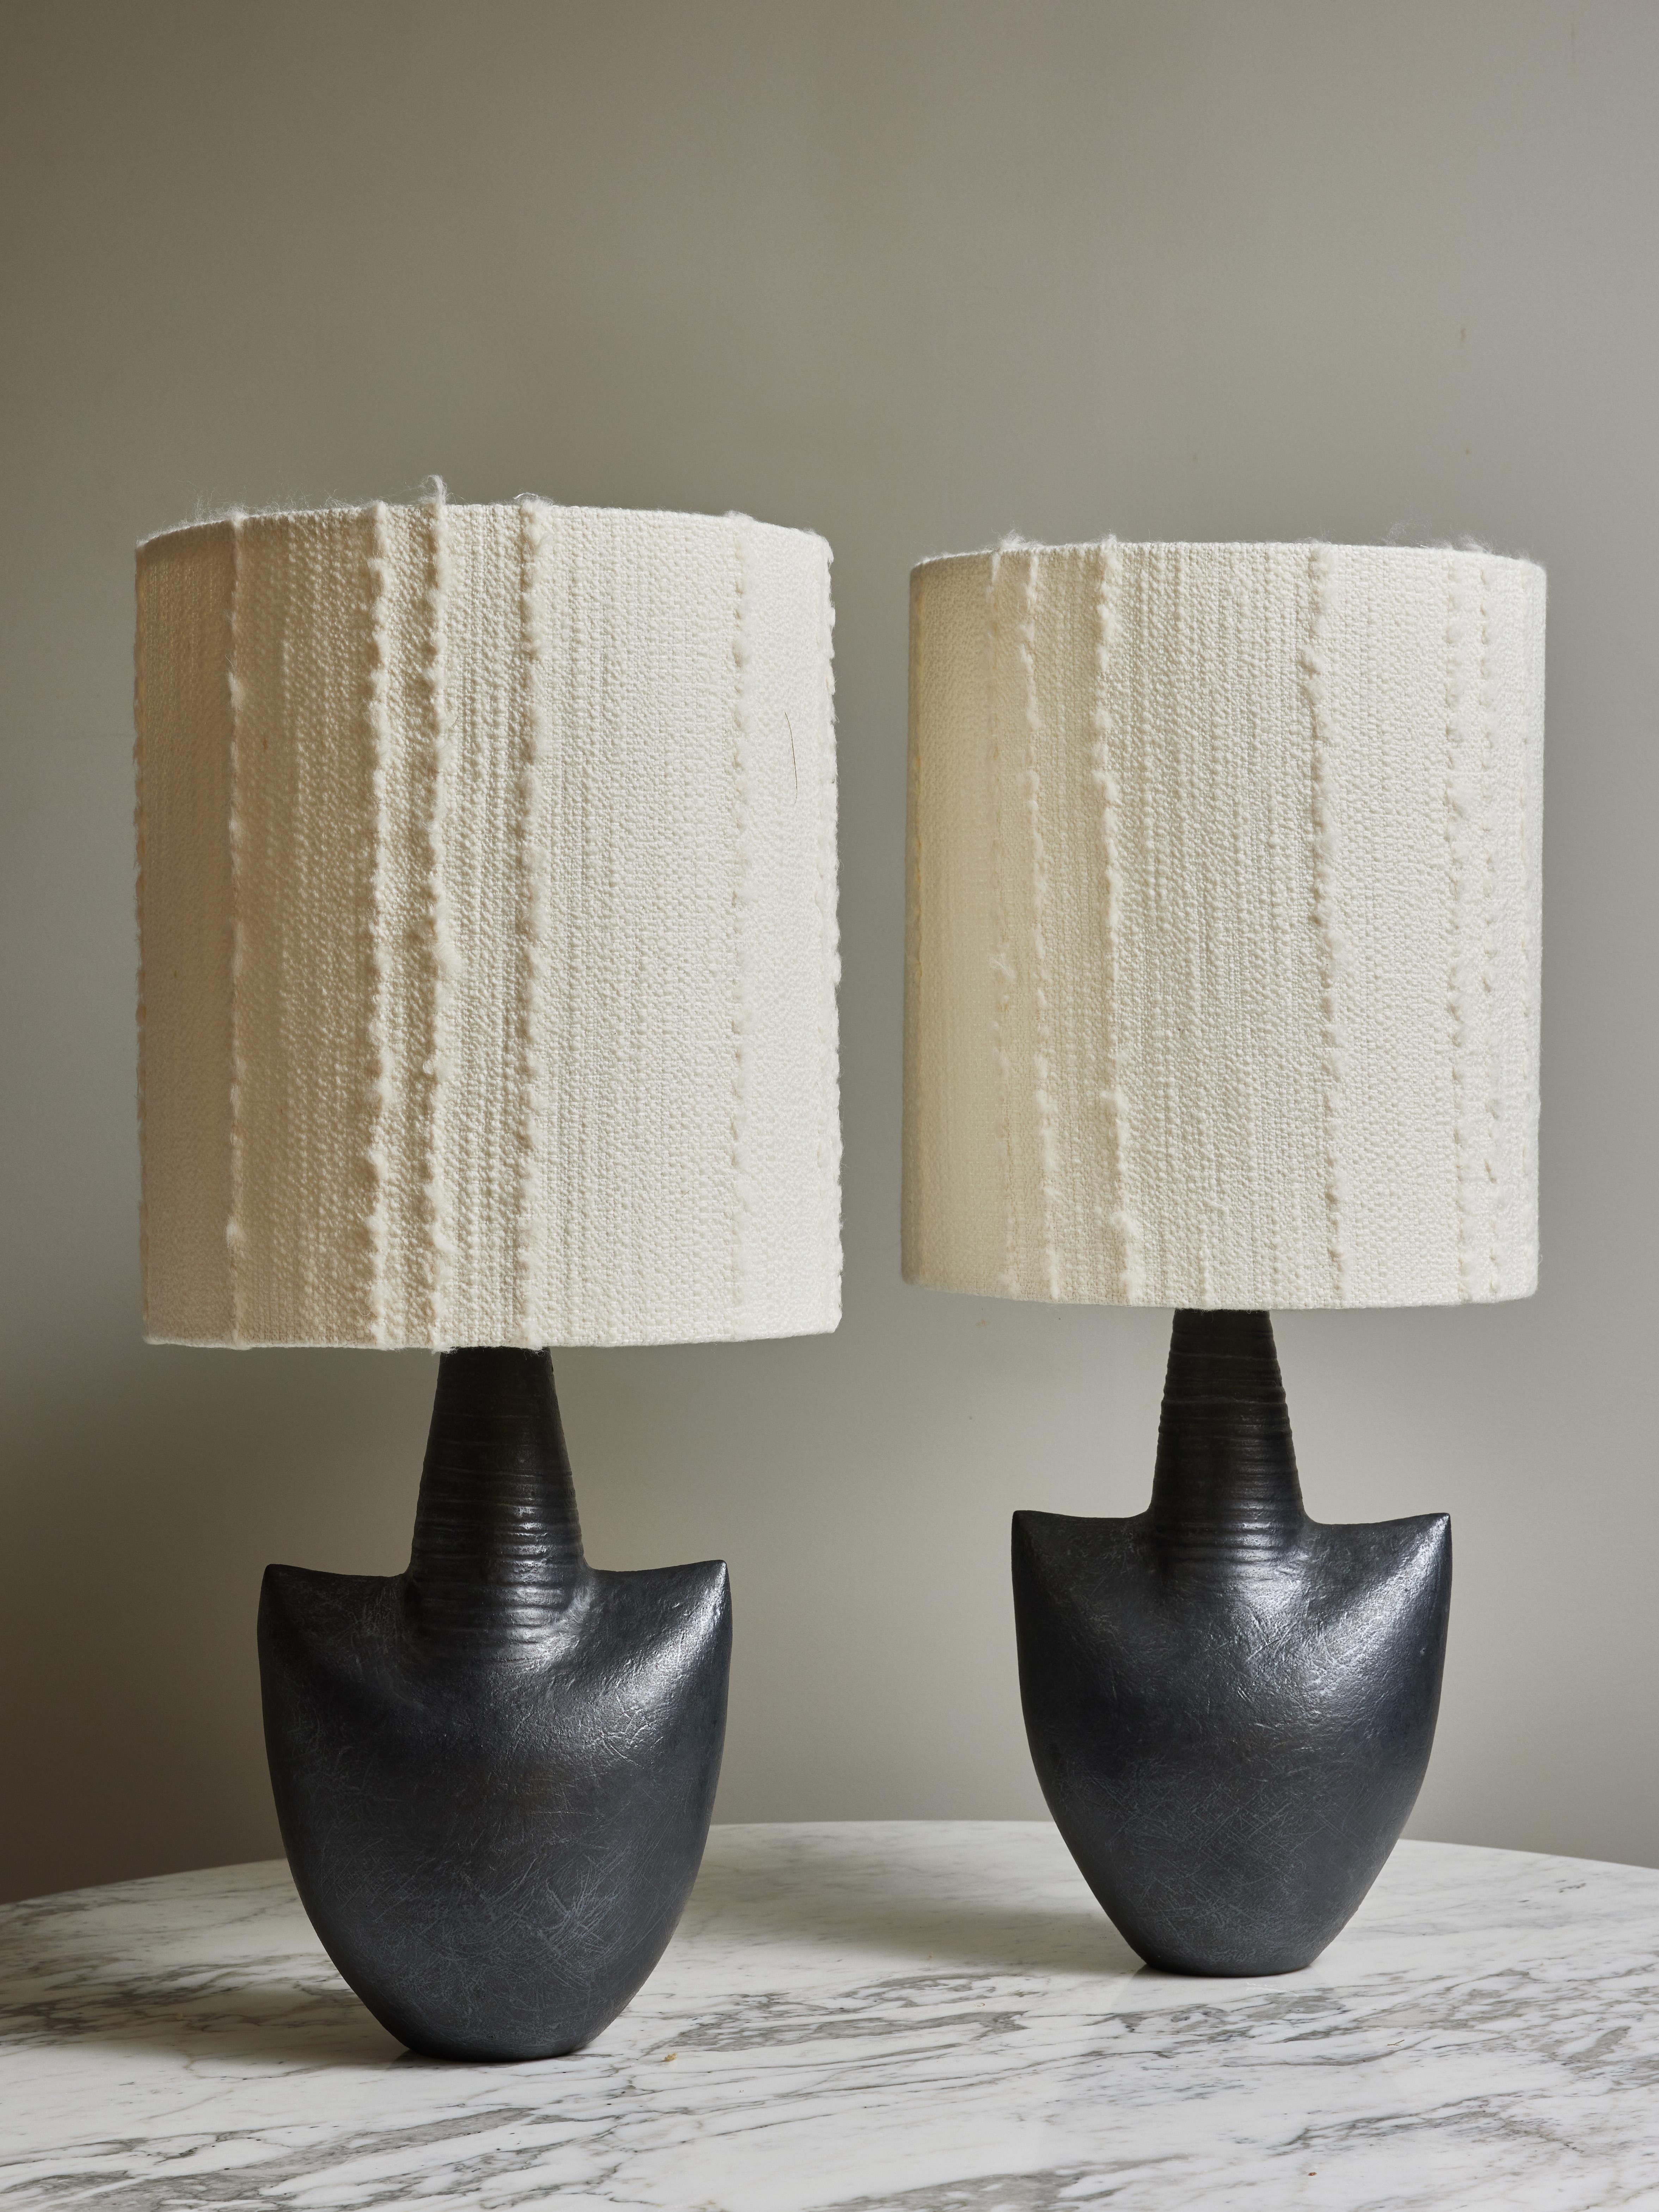 Pair of modern ceramic by Andre Bloch turned into table lamps. Topped with modern lampshade with Nobilis fabric.